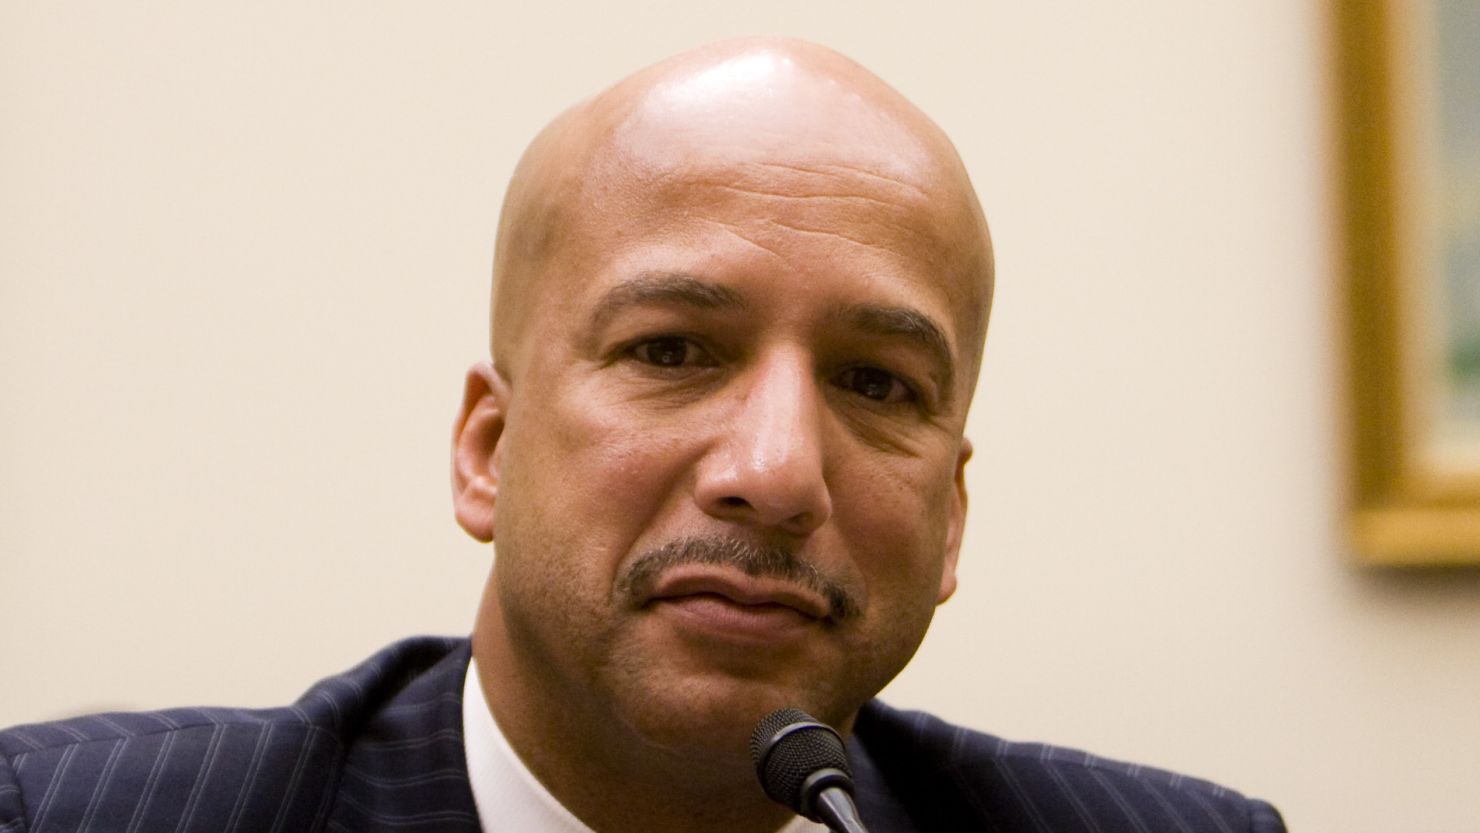 In 2005, then New Orleans Mayor Ray Nagin took center stage on behalf of victims when he excoriated the slow pace of federal and state relief efforts.